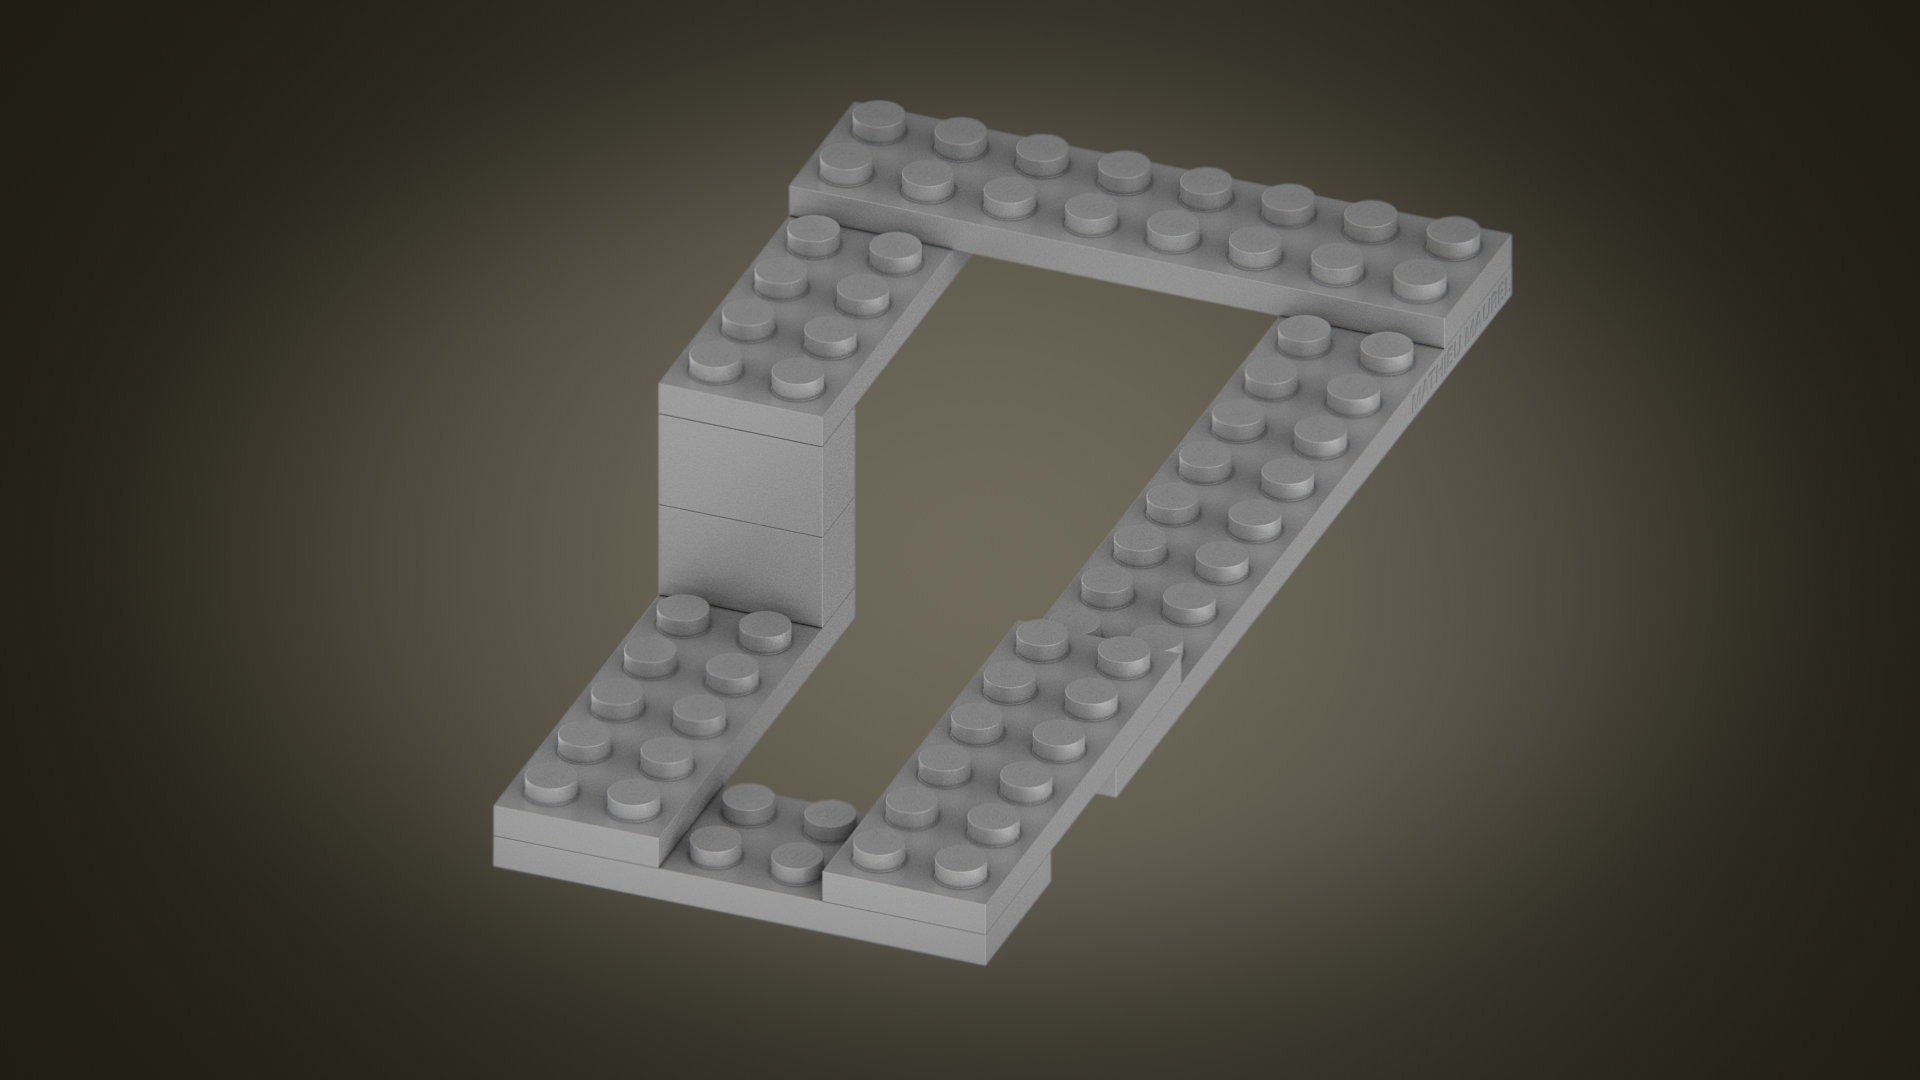 LEGO ABSTRACT